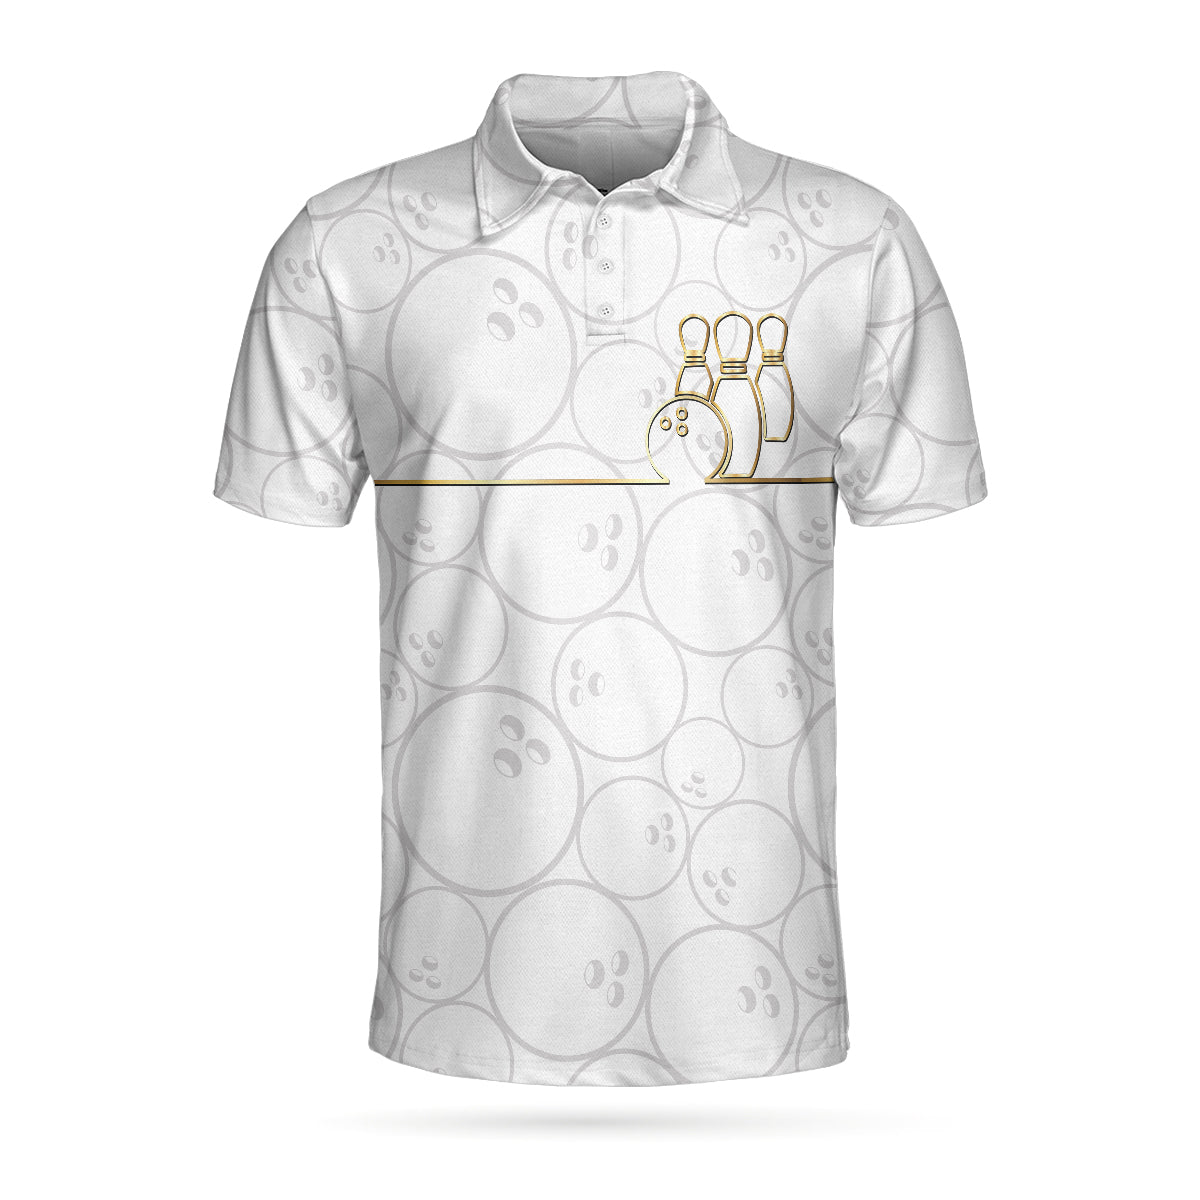 Bowling White And Golden Pattern Short Sleeve Polo Shirt/ Bowling Ball Pattern Polo Shirt/ Best Bowling Shirt For Men Coolspod